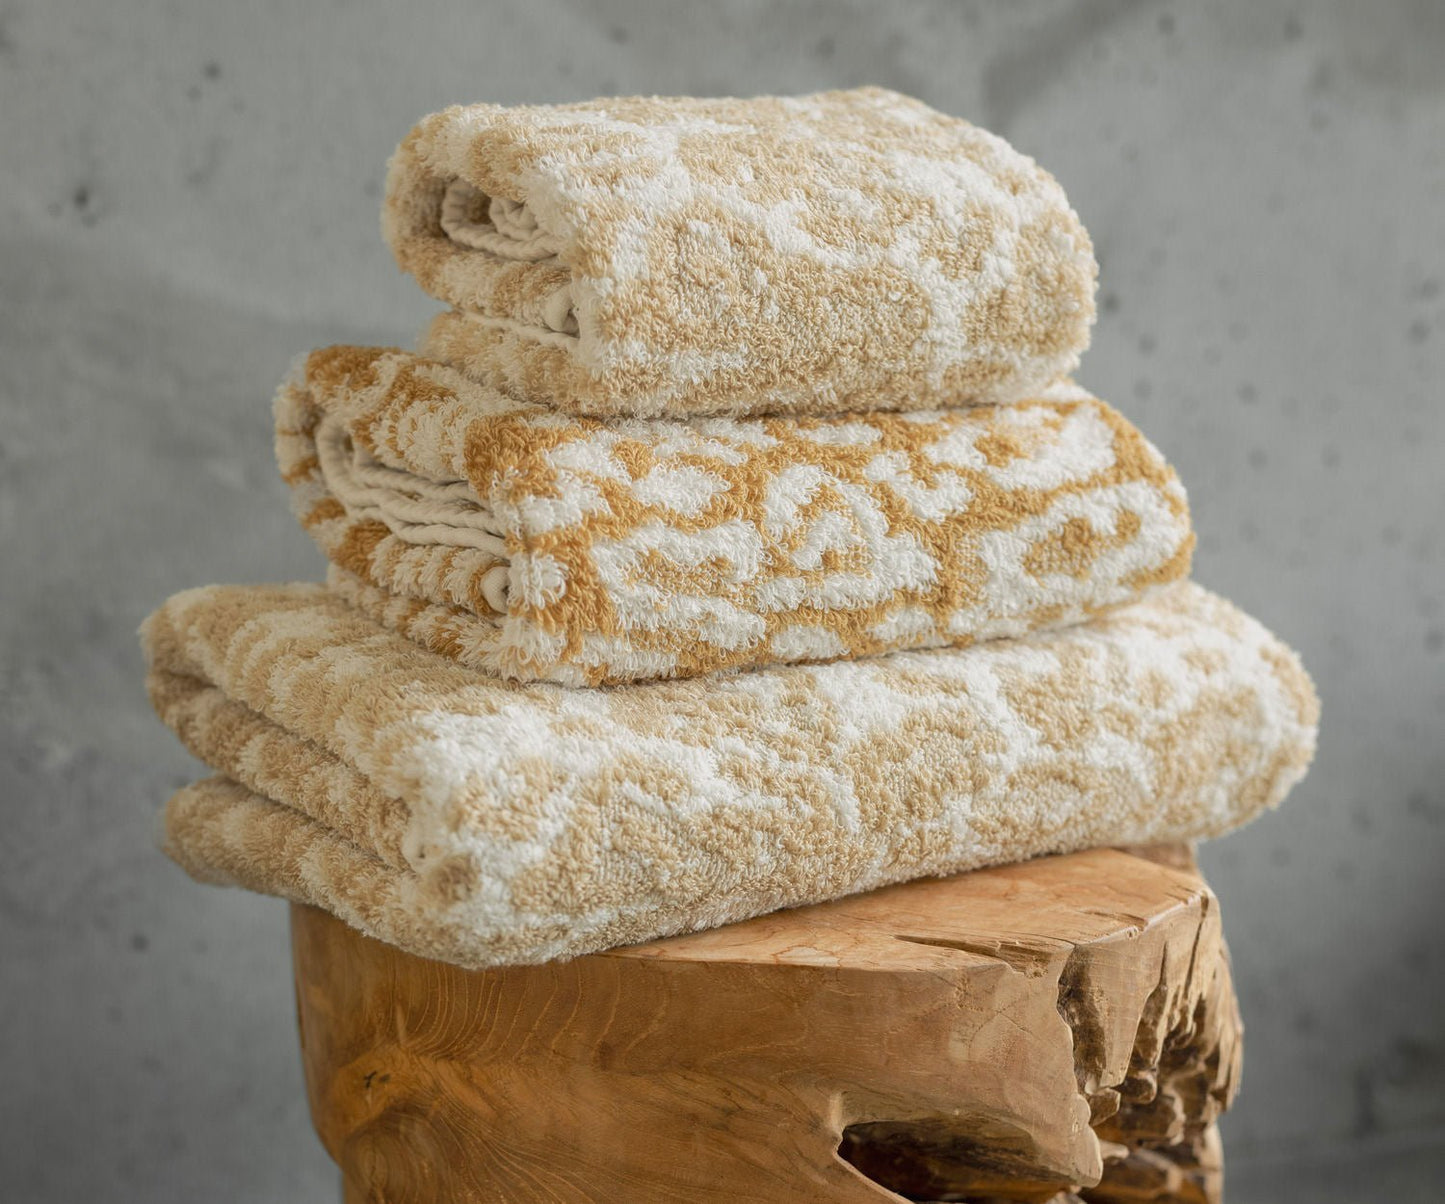 SAUVAGE Towels by Abyss & Habidecor 100% Giza Egyptian Cotton - |VESIMI Design| Luxury Bathrooms and Home Decor